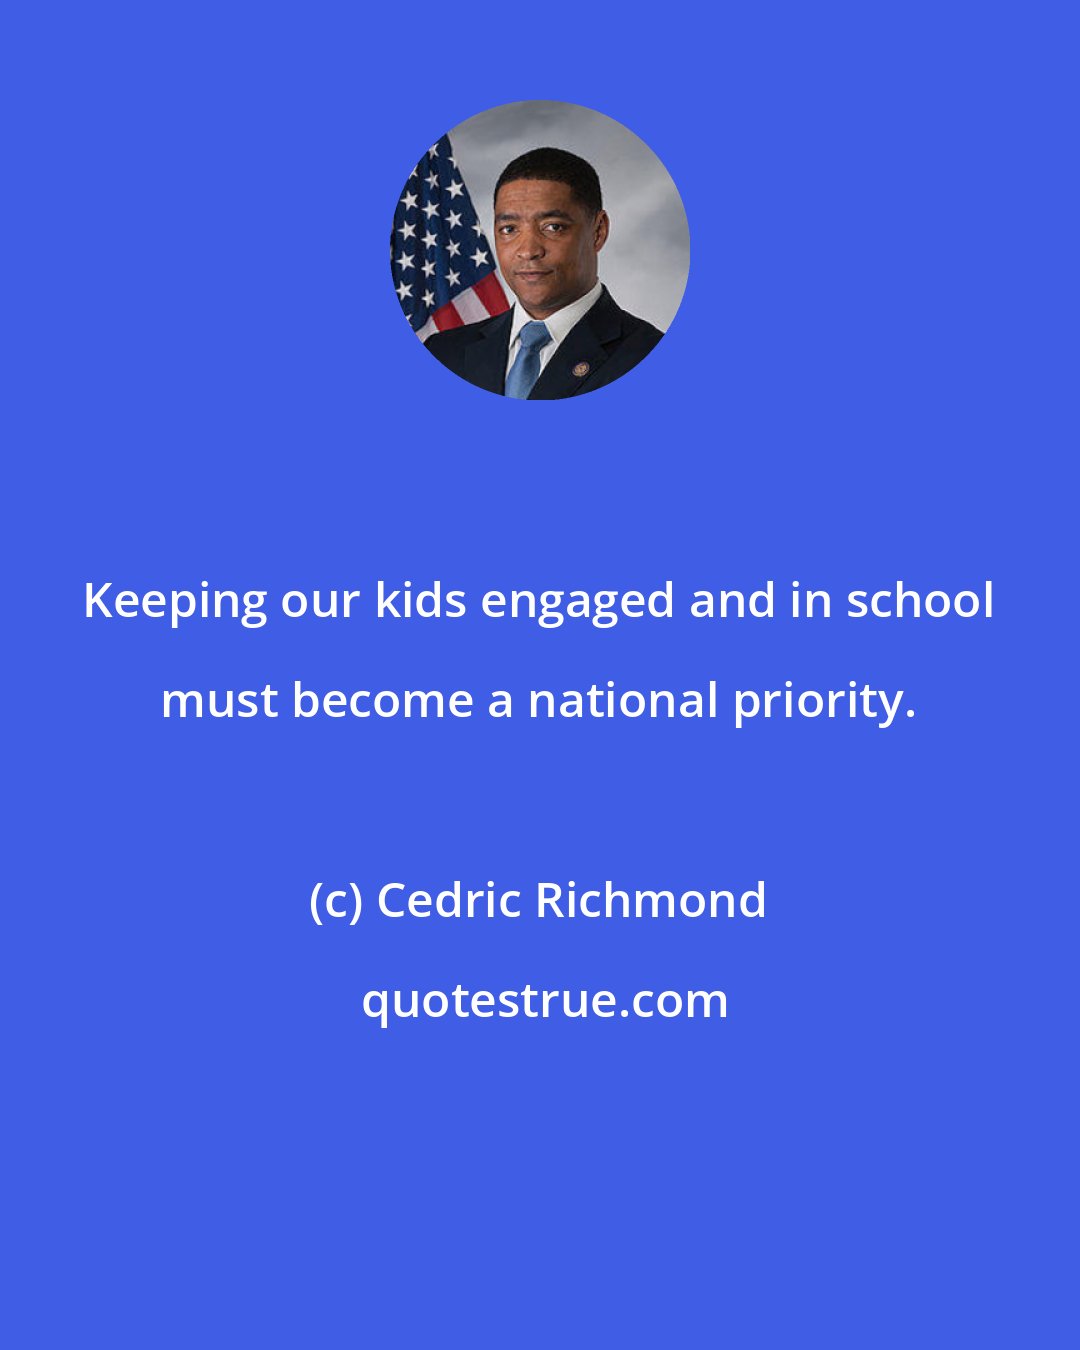 Cedric Richmond: Keeping our kids engaged and in school must become a national priority.